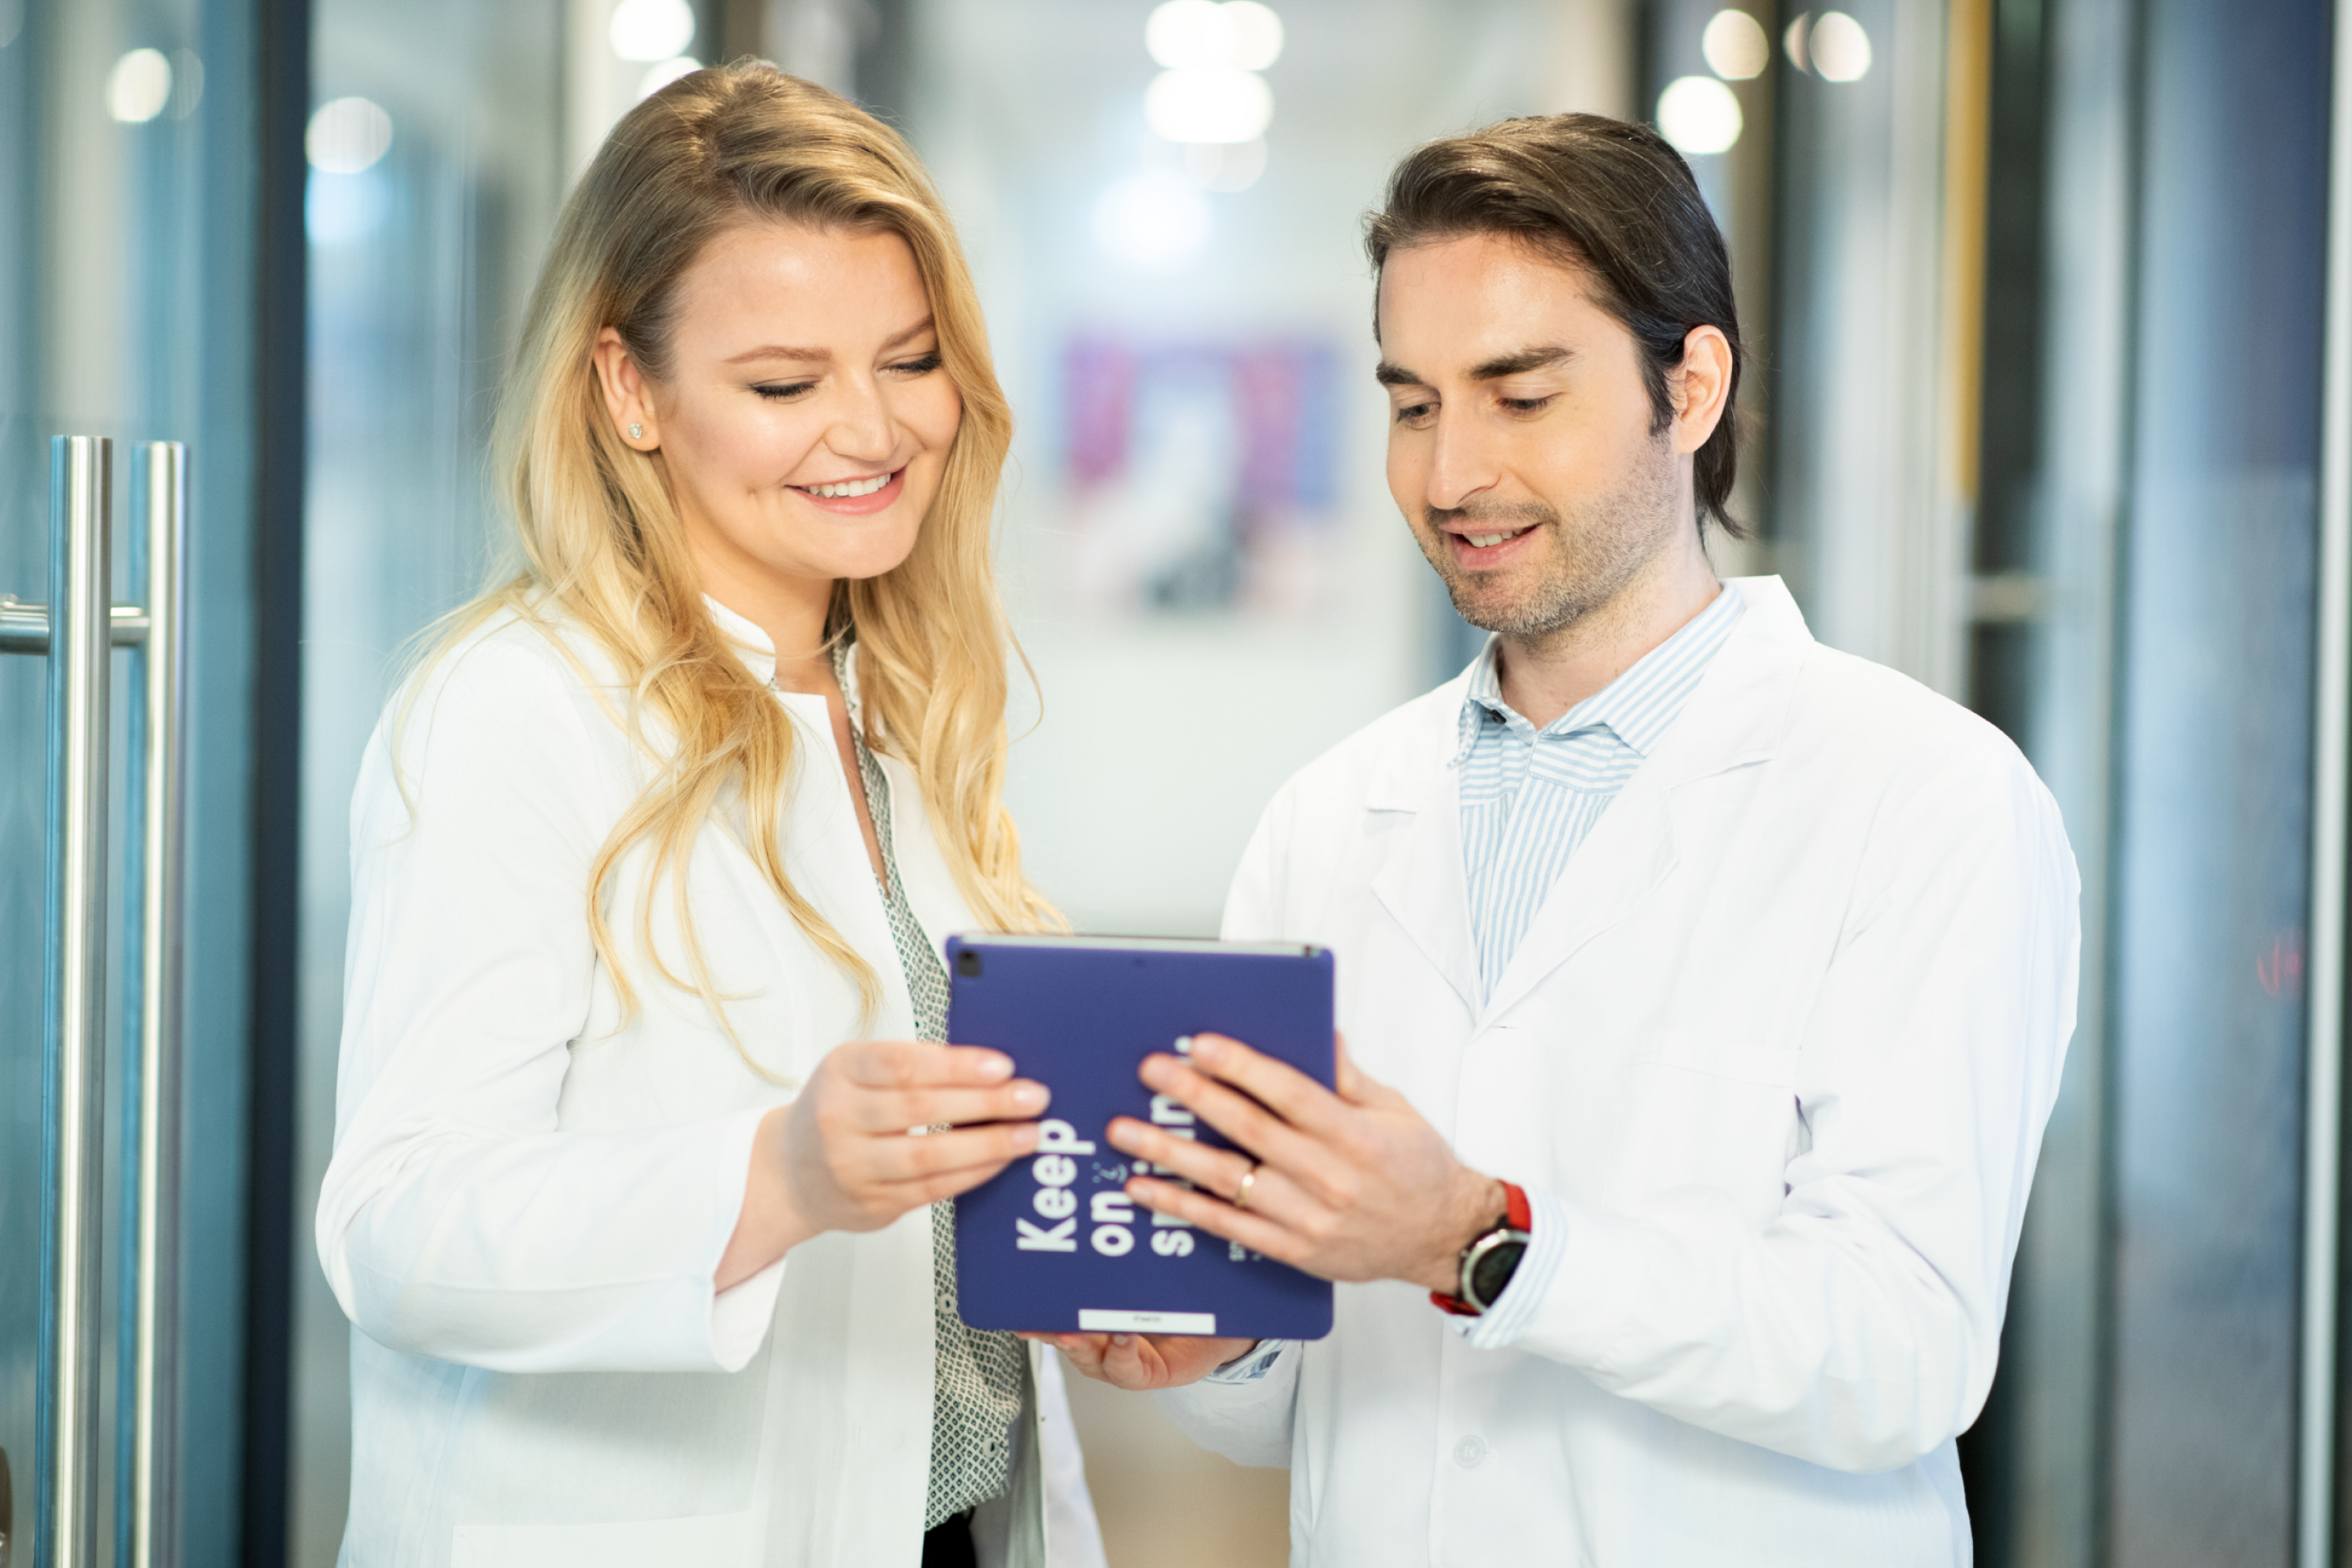 A blonde woman and brunette man wearing lab coats smiling and looking at a SmileDirectClub tablet